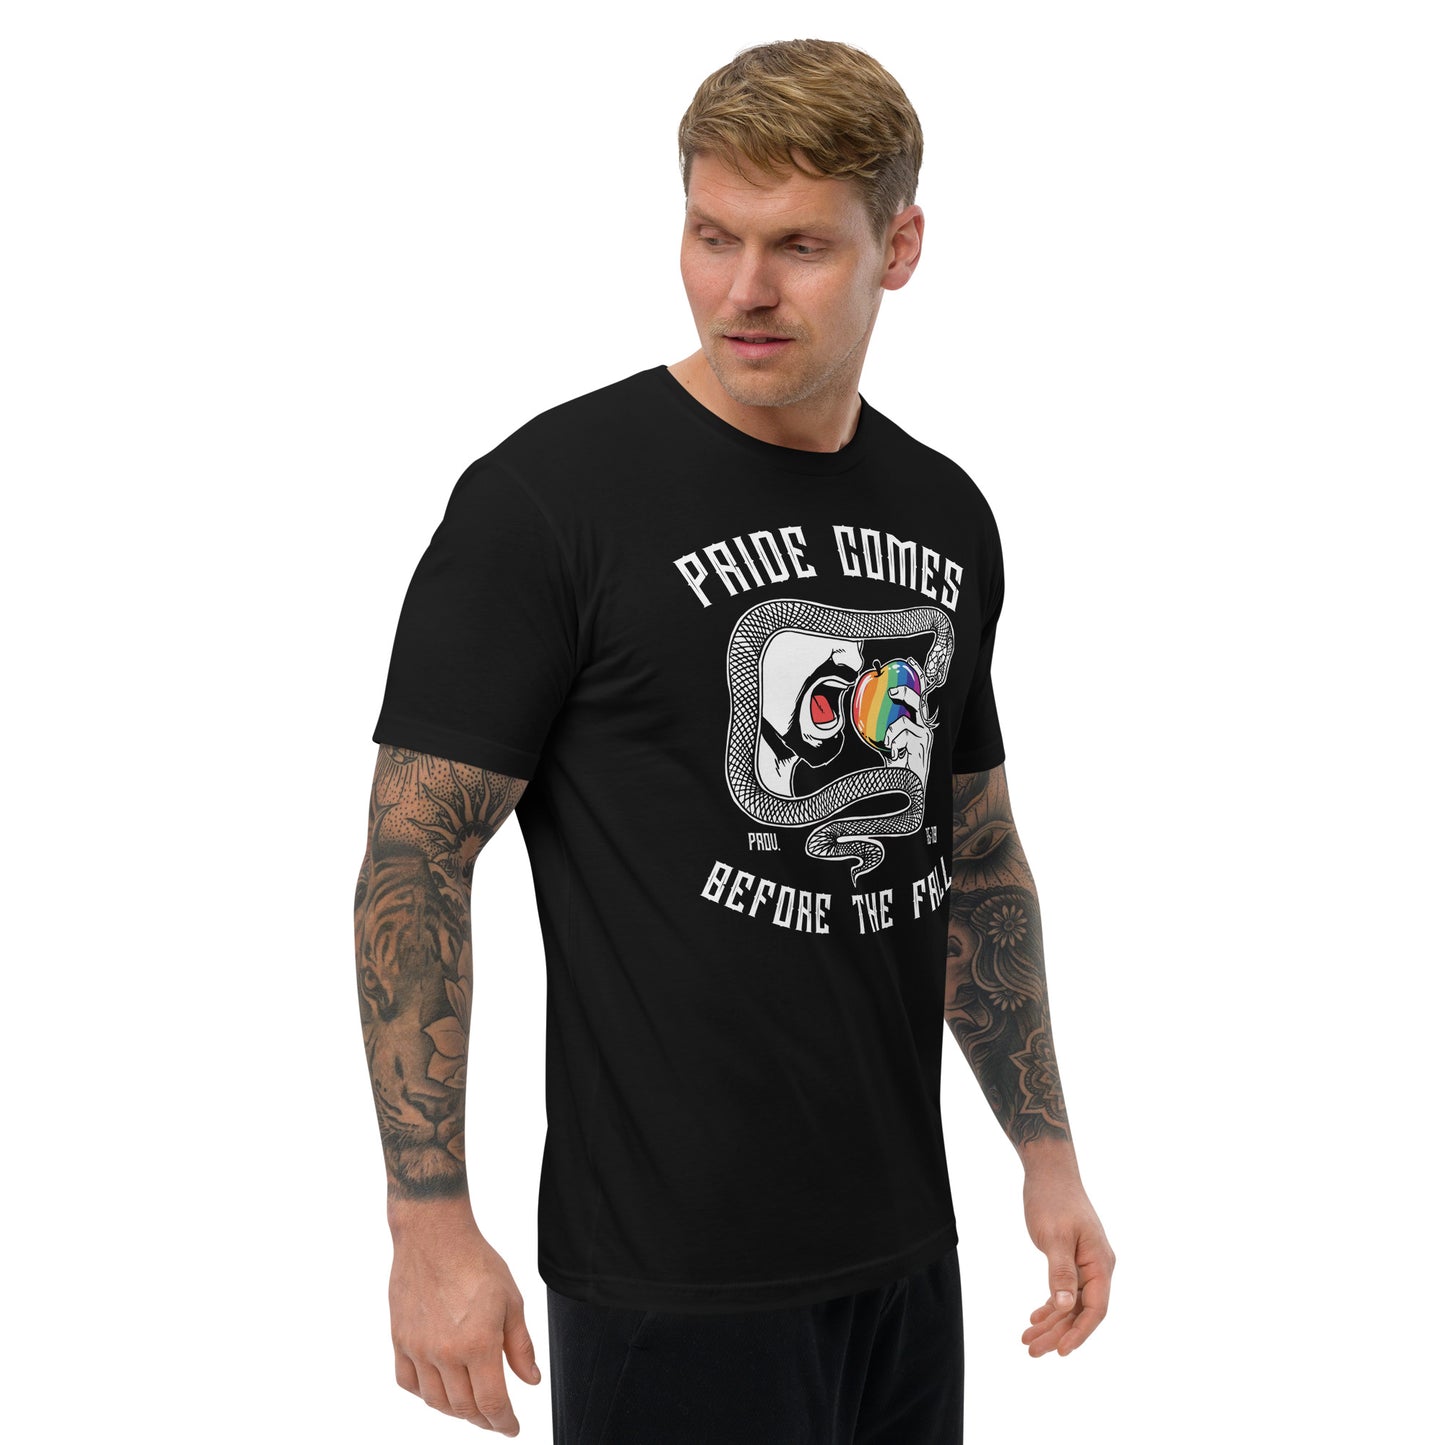 "Pride Comes Before The Fall." (Adam) - Men's  Fitted T-shirt